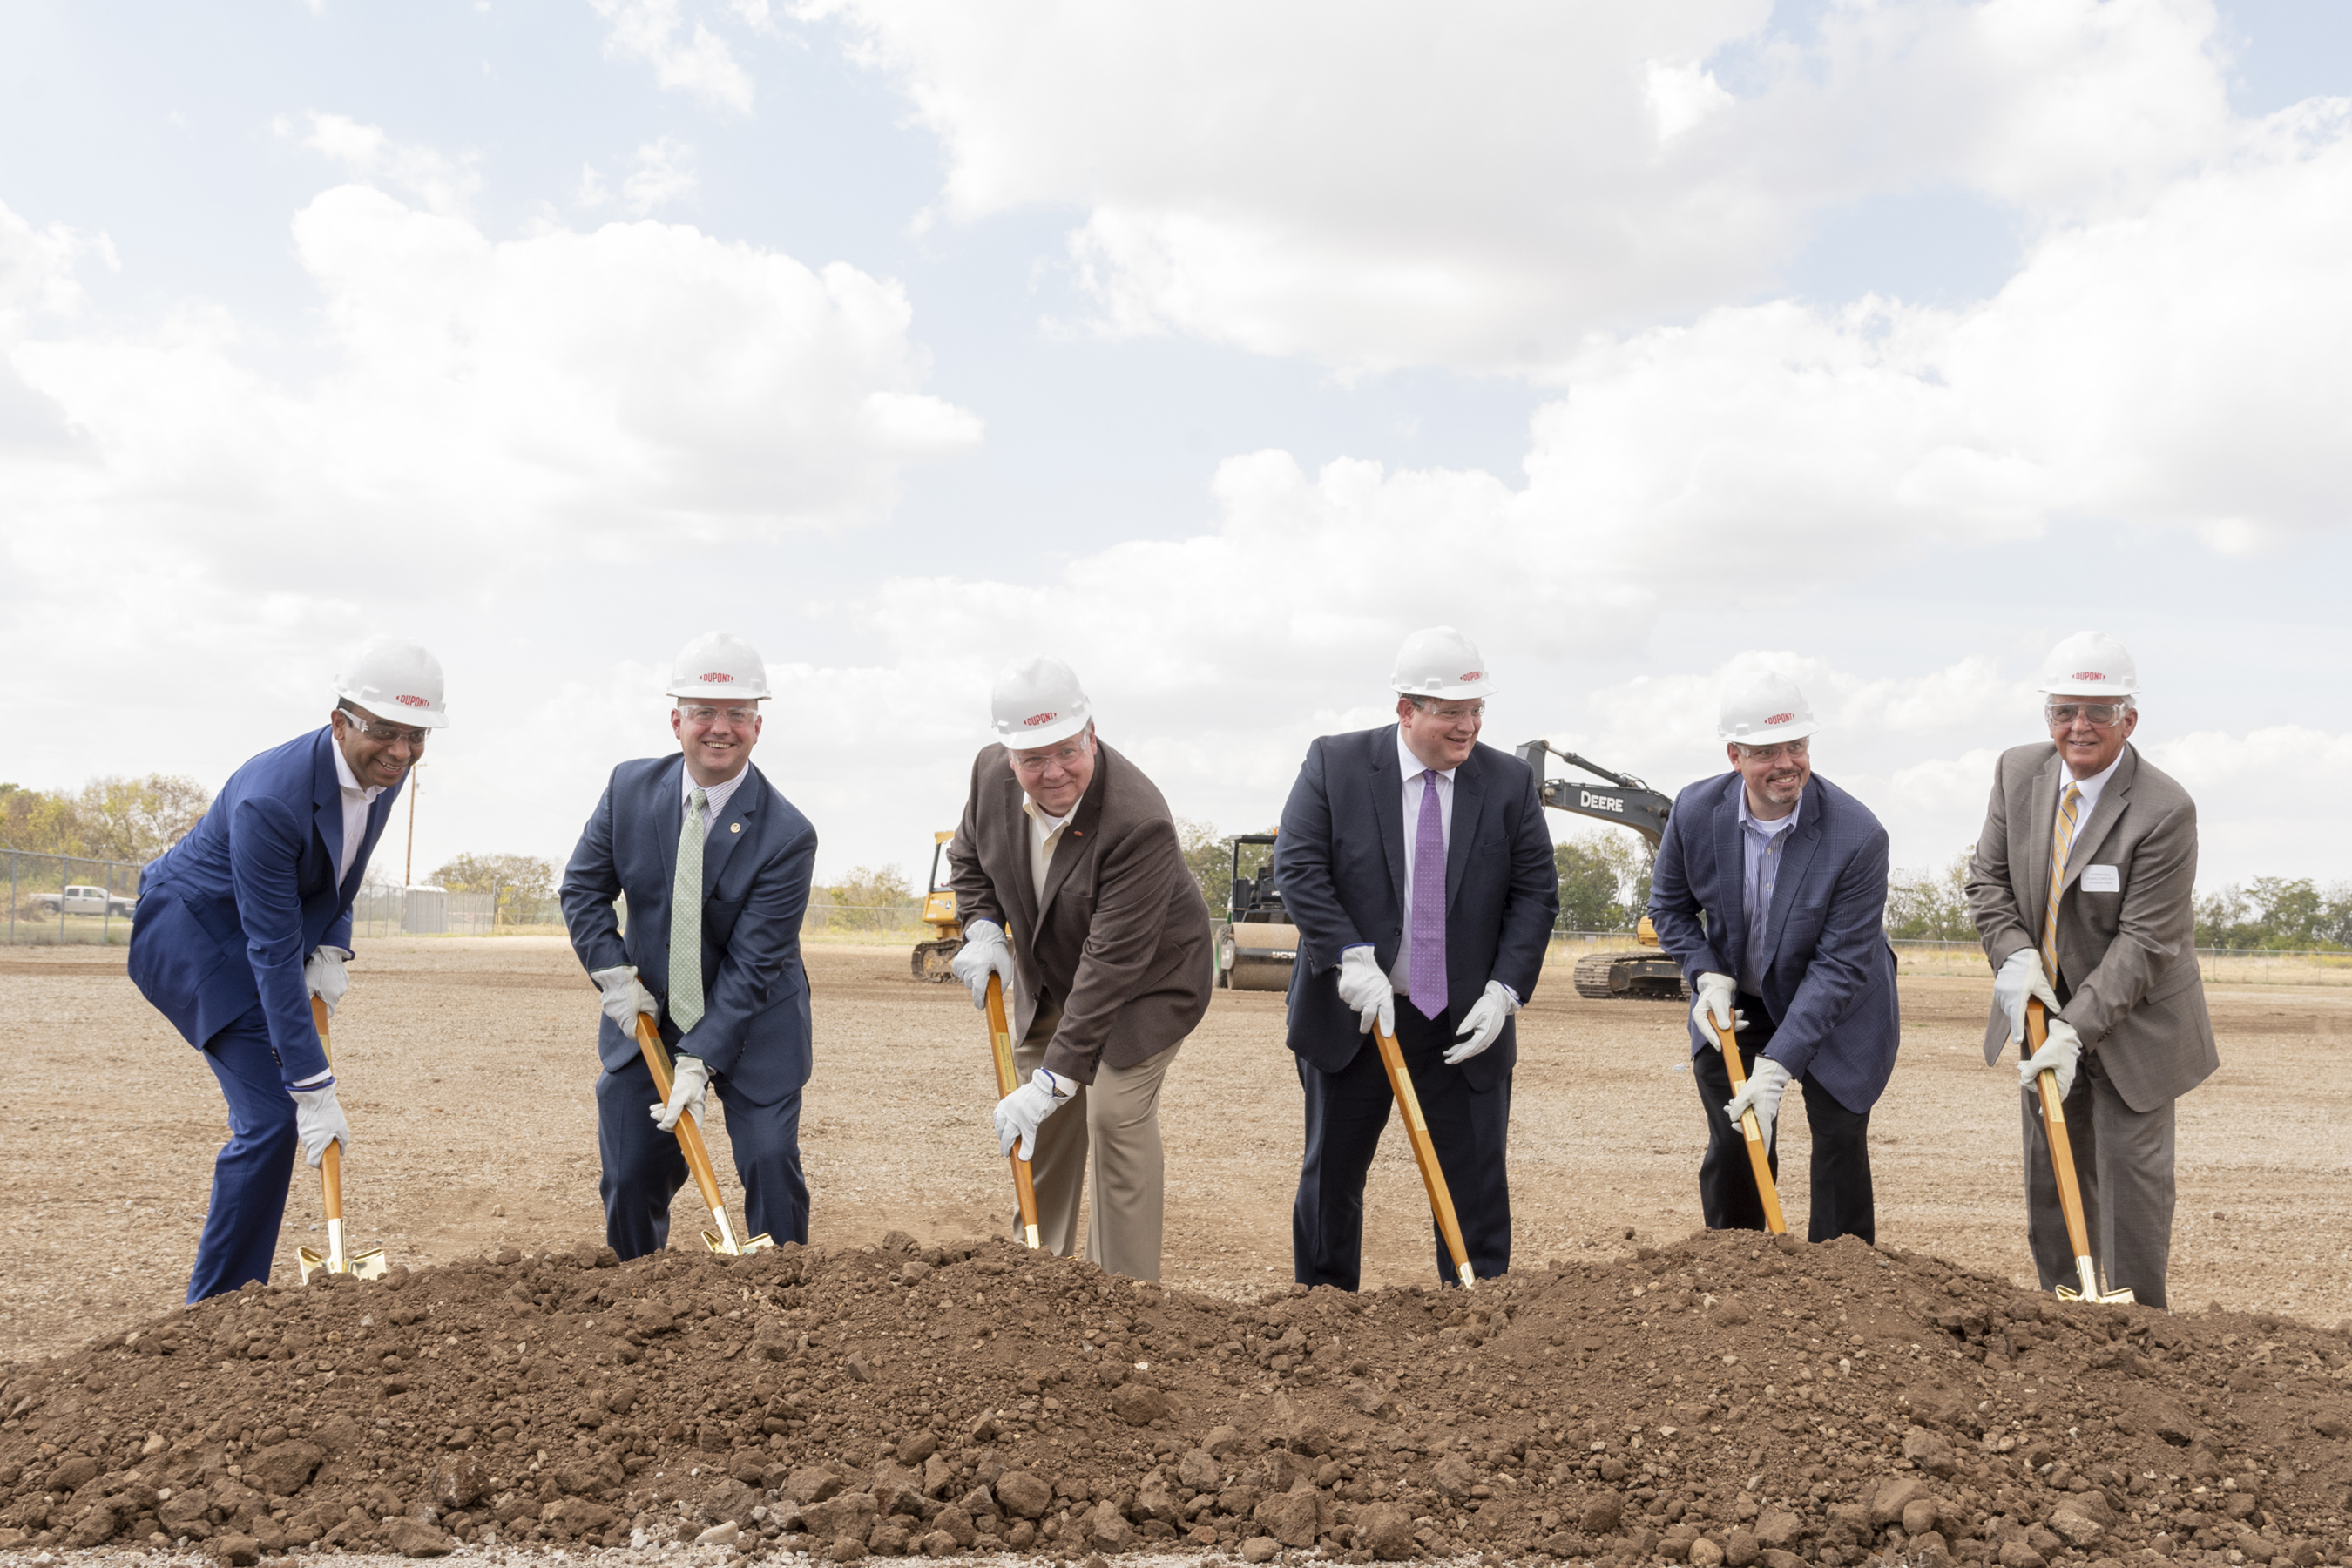 DuPont Electronics & Imaging Hosted a Groundbreaking Ceremony in Circleville, Ohio